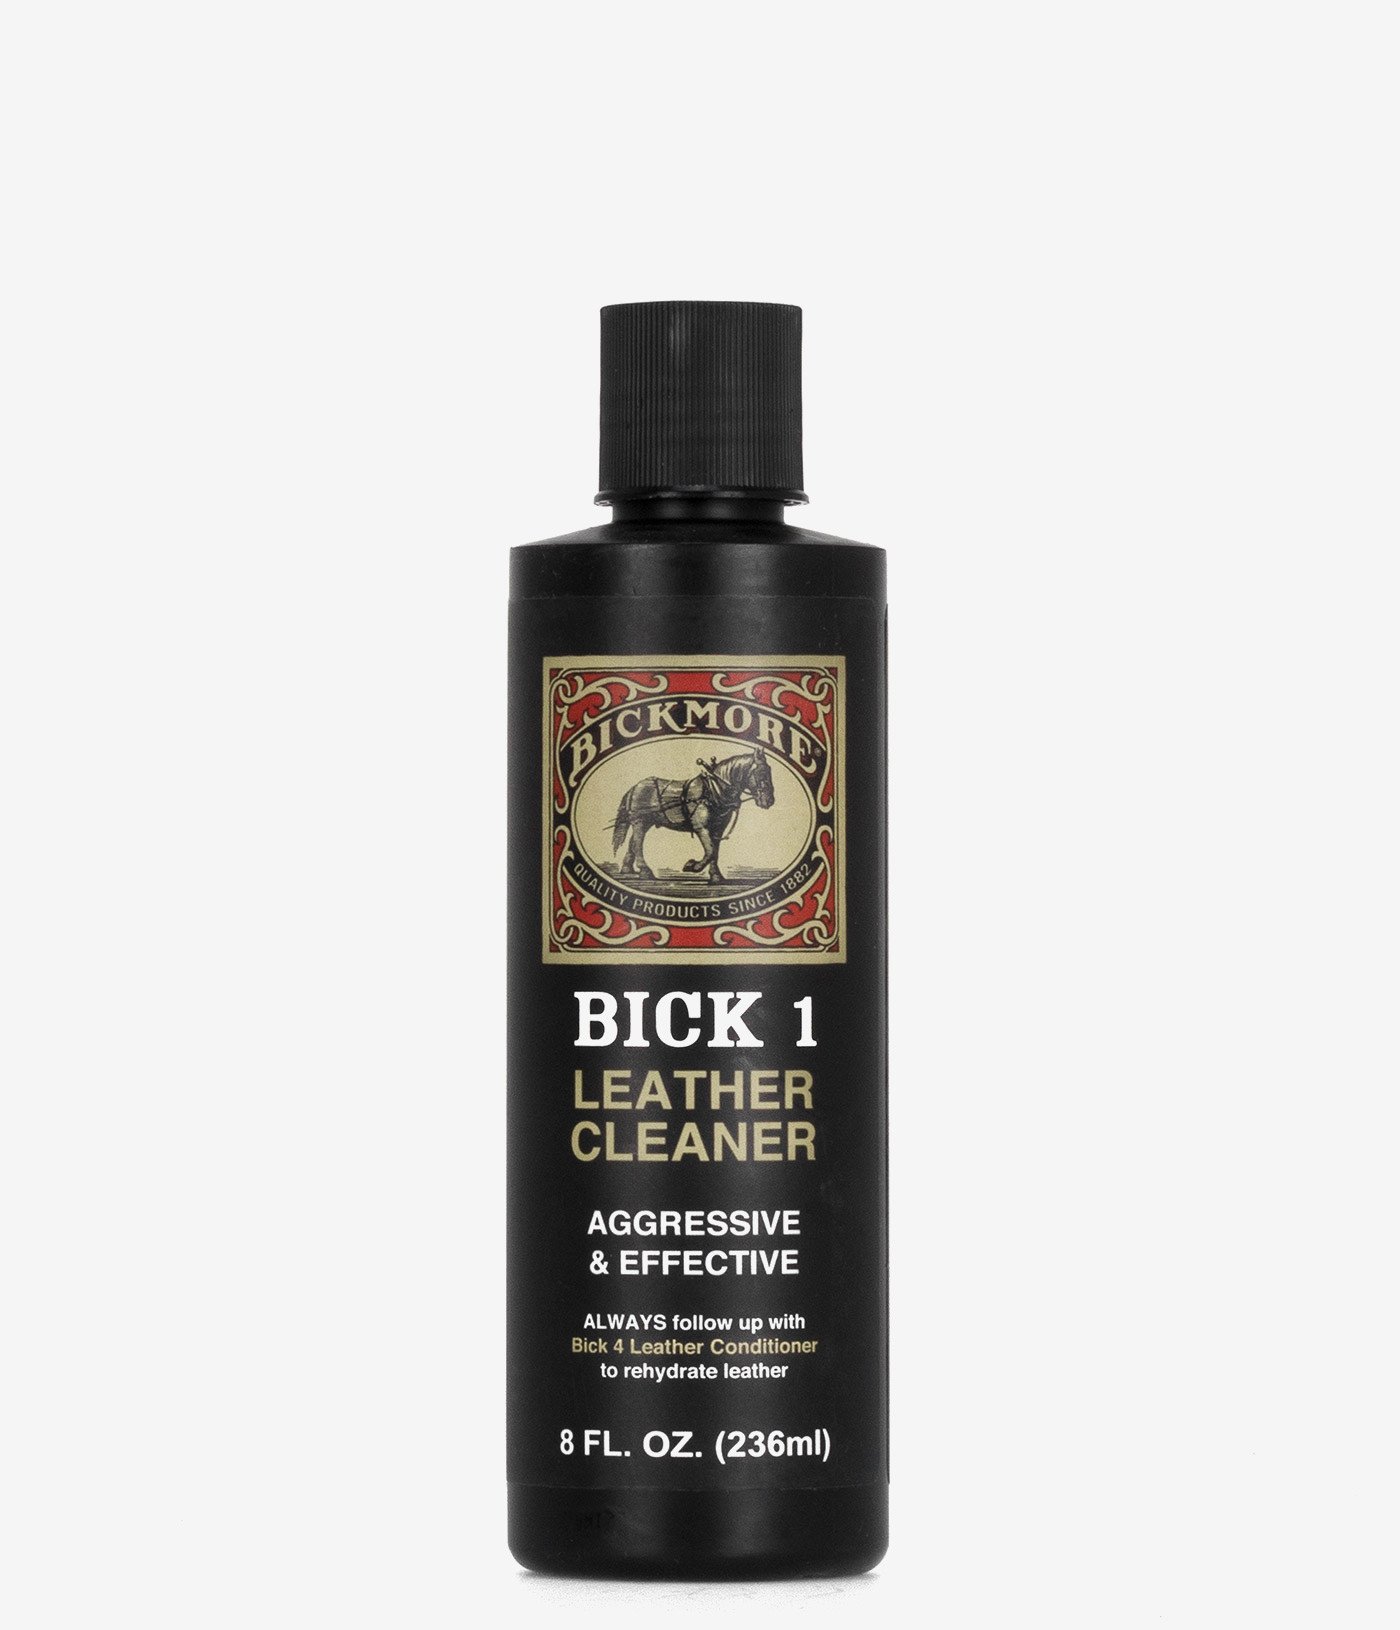 Bickmore Bick 1 Leather Cleaner